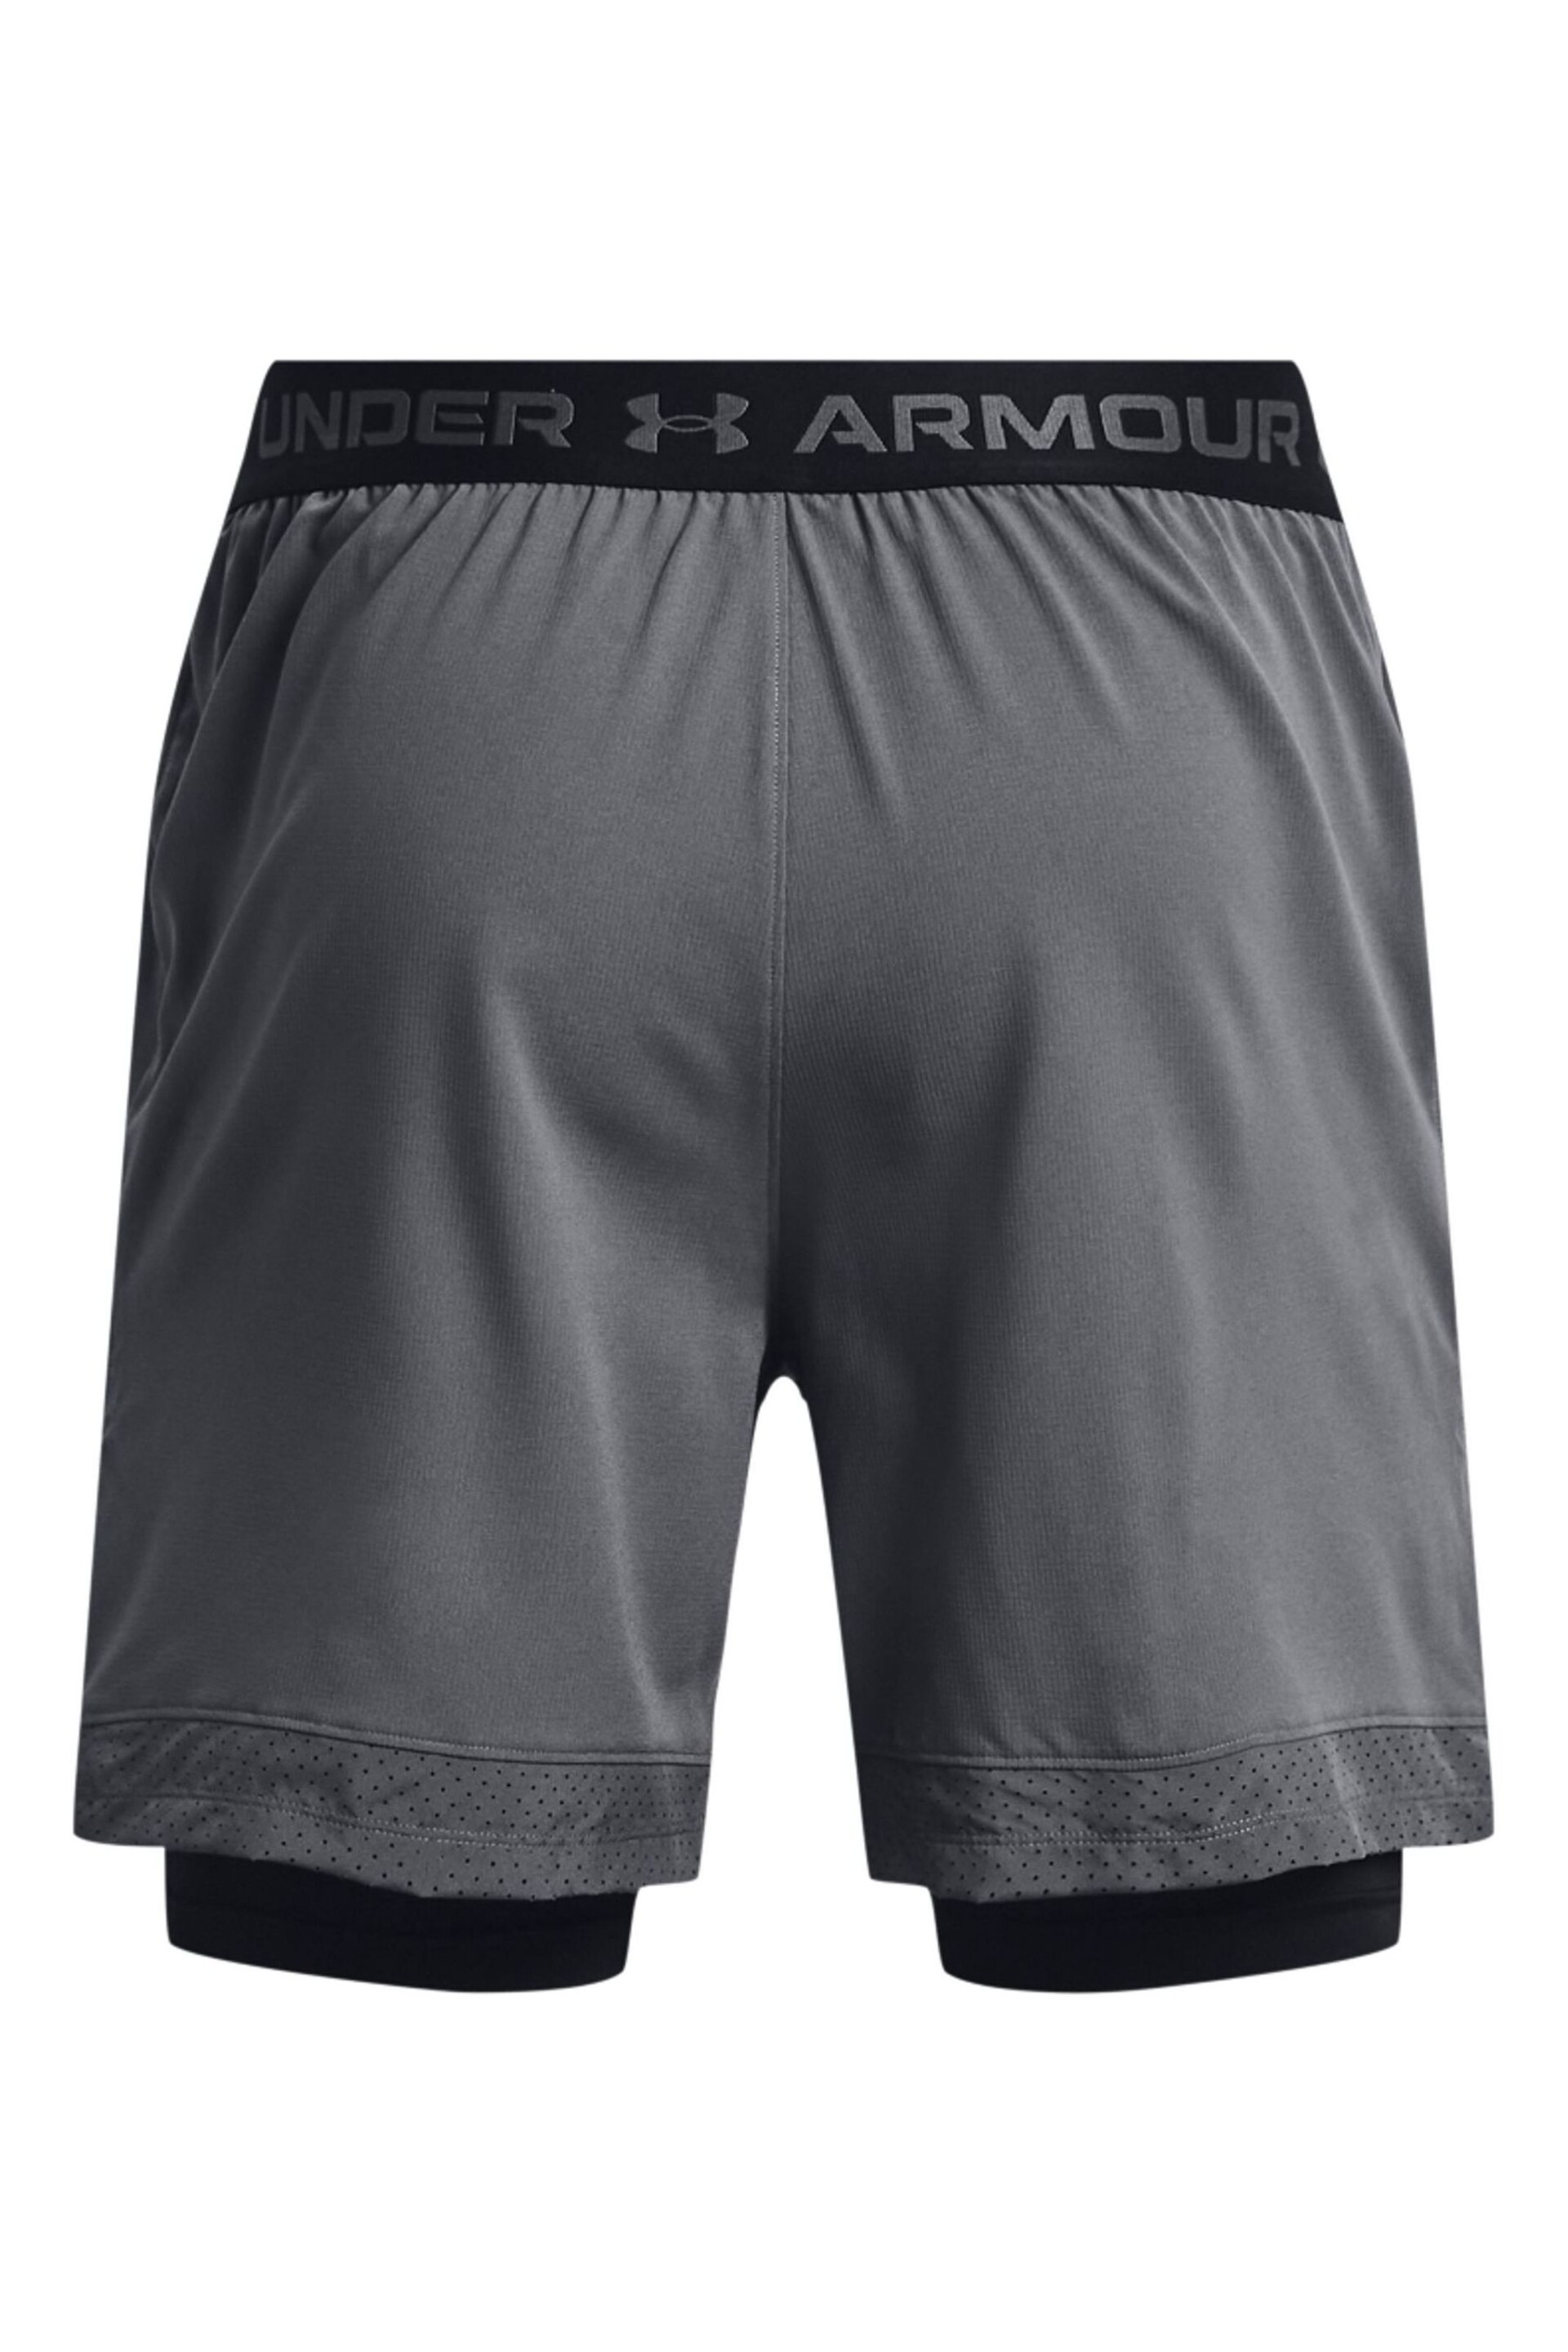 Under Armour Grey Vanish Woven 2-In-1 Shorts - Image 6 of 7